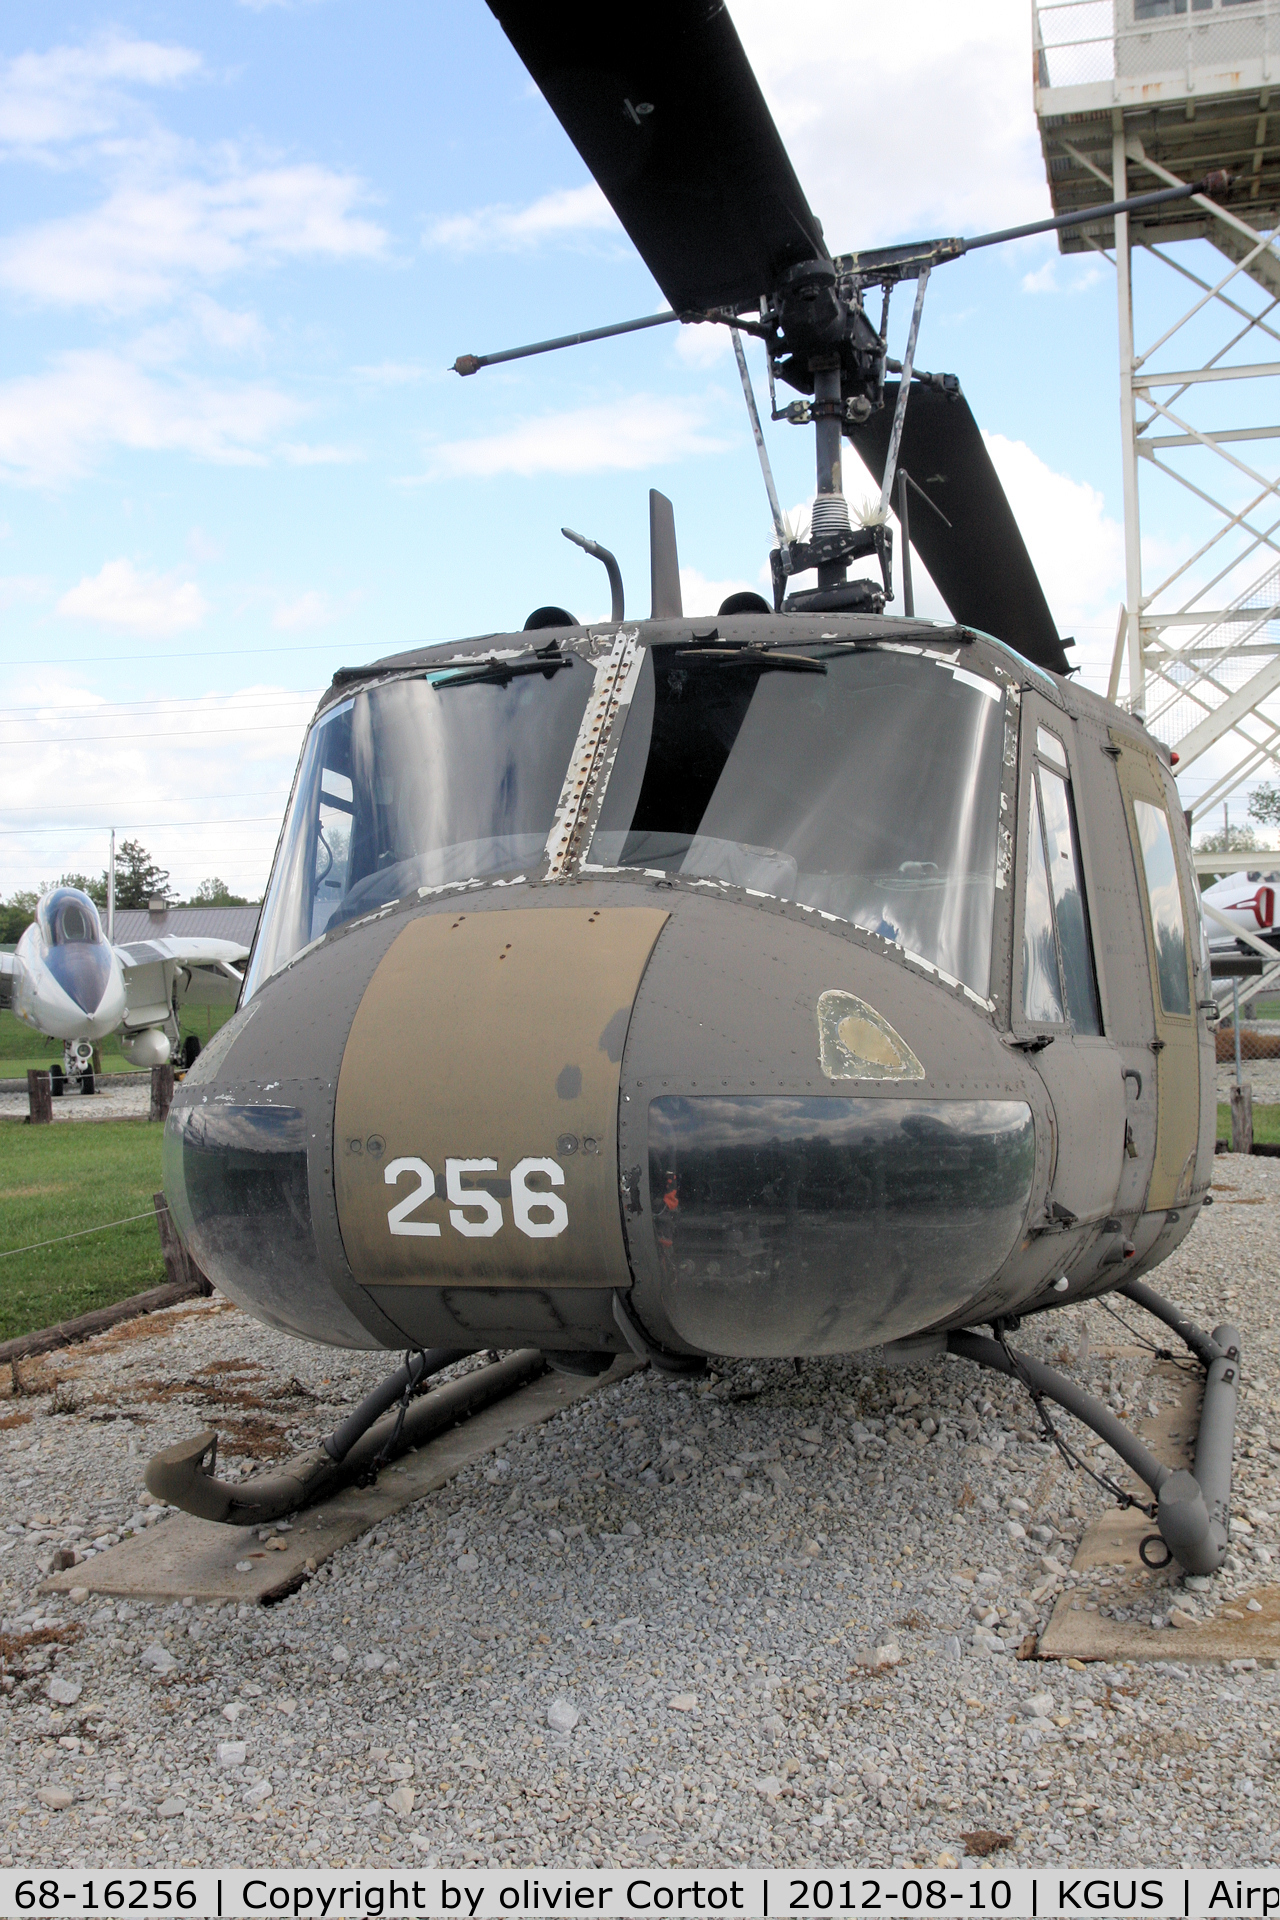 68-16256, 1968 Bell UH-1H Iroquois C/N 10915, front view